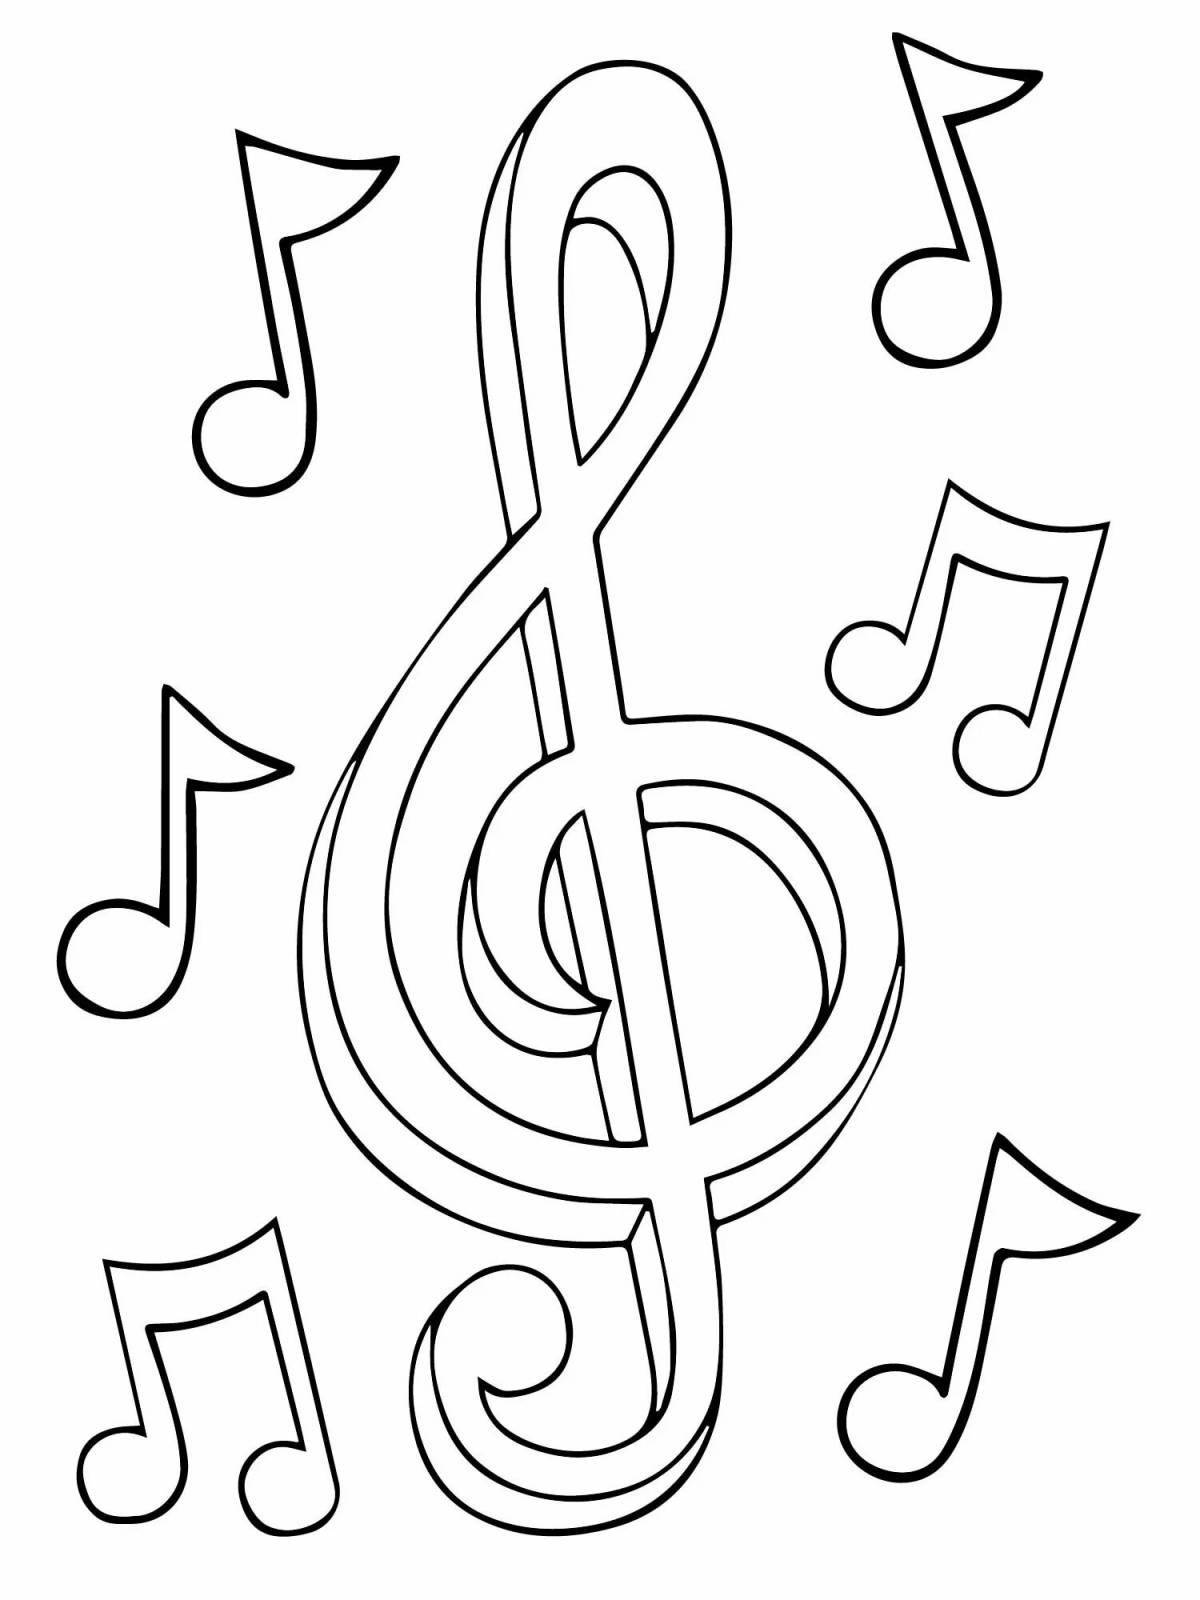 Attractive musical note coloring book